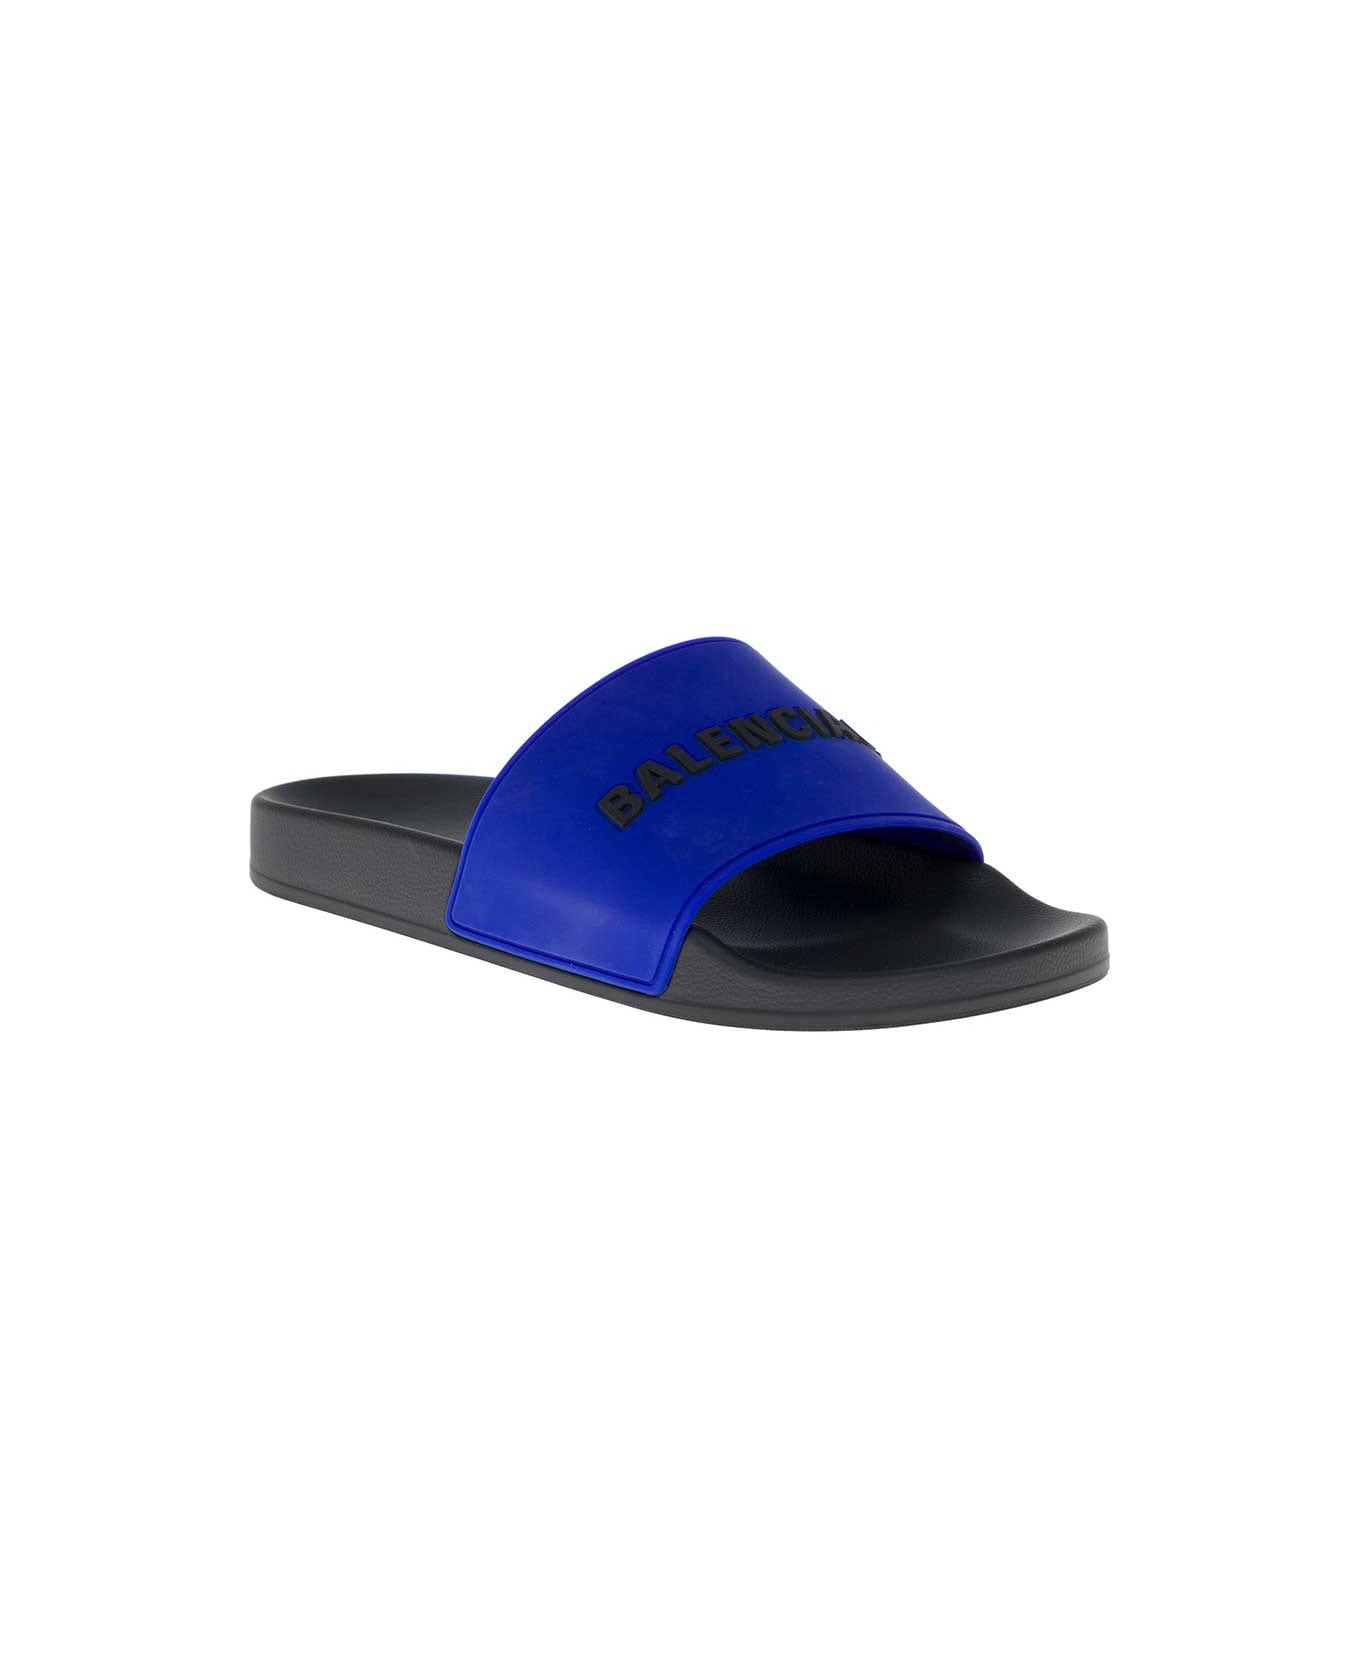 Balenciaga Bicolor Rubber Slide Sandals With Logo | italist, ALWAYS LIKE A  SALE